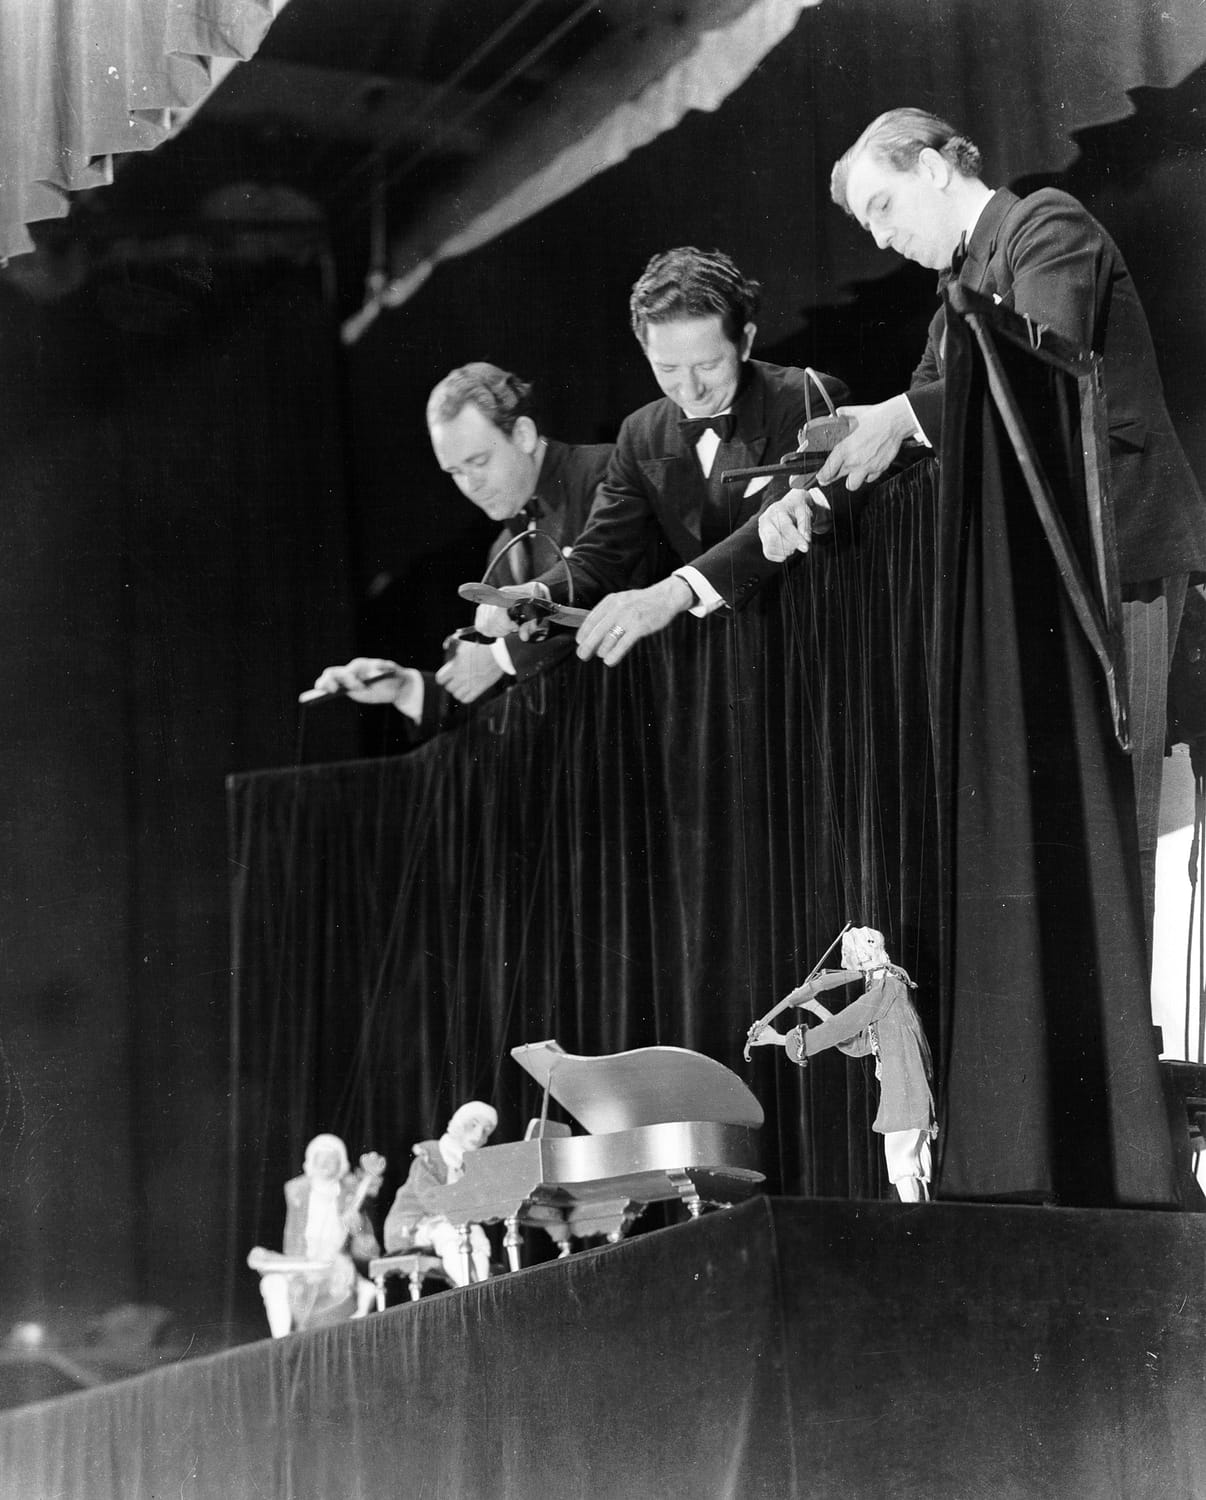 wearing tuxedos, the Yale Puppeteers hang the Haydn Trio puppets over a black curtain at the Barbizon Plaza